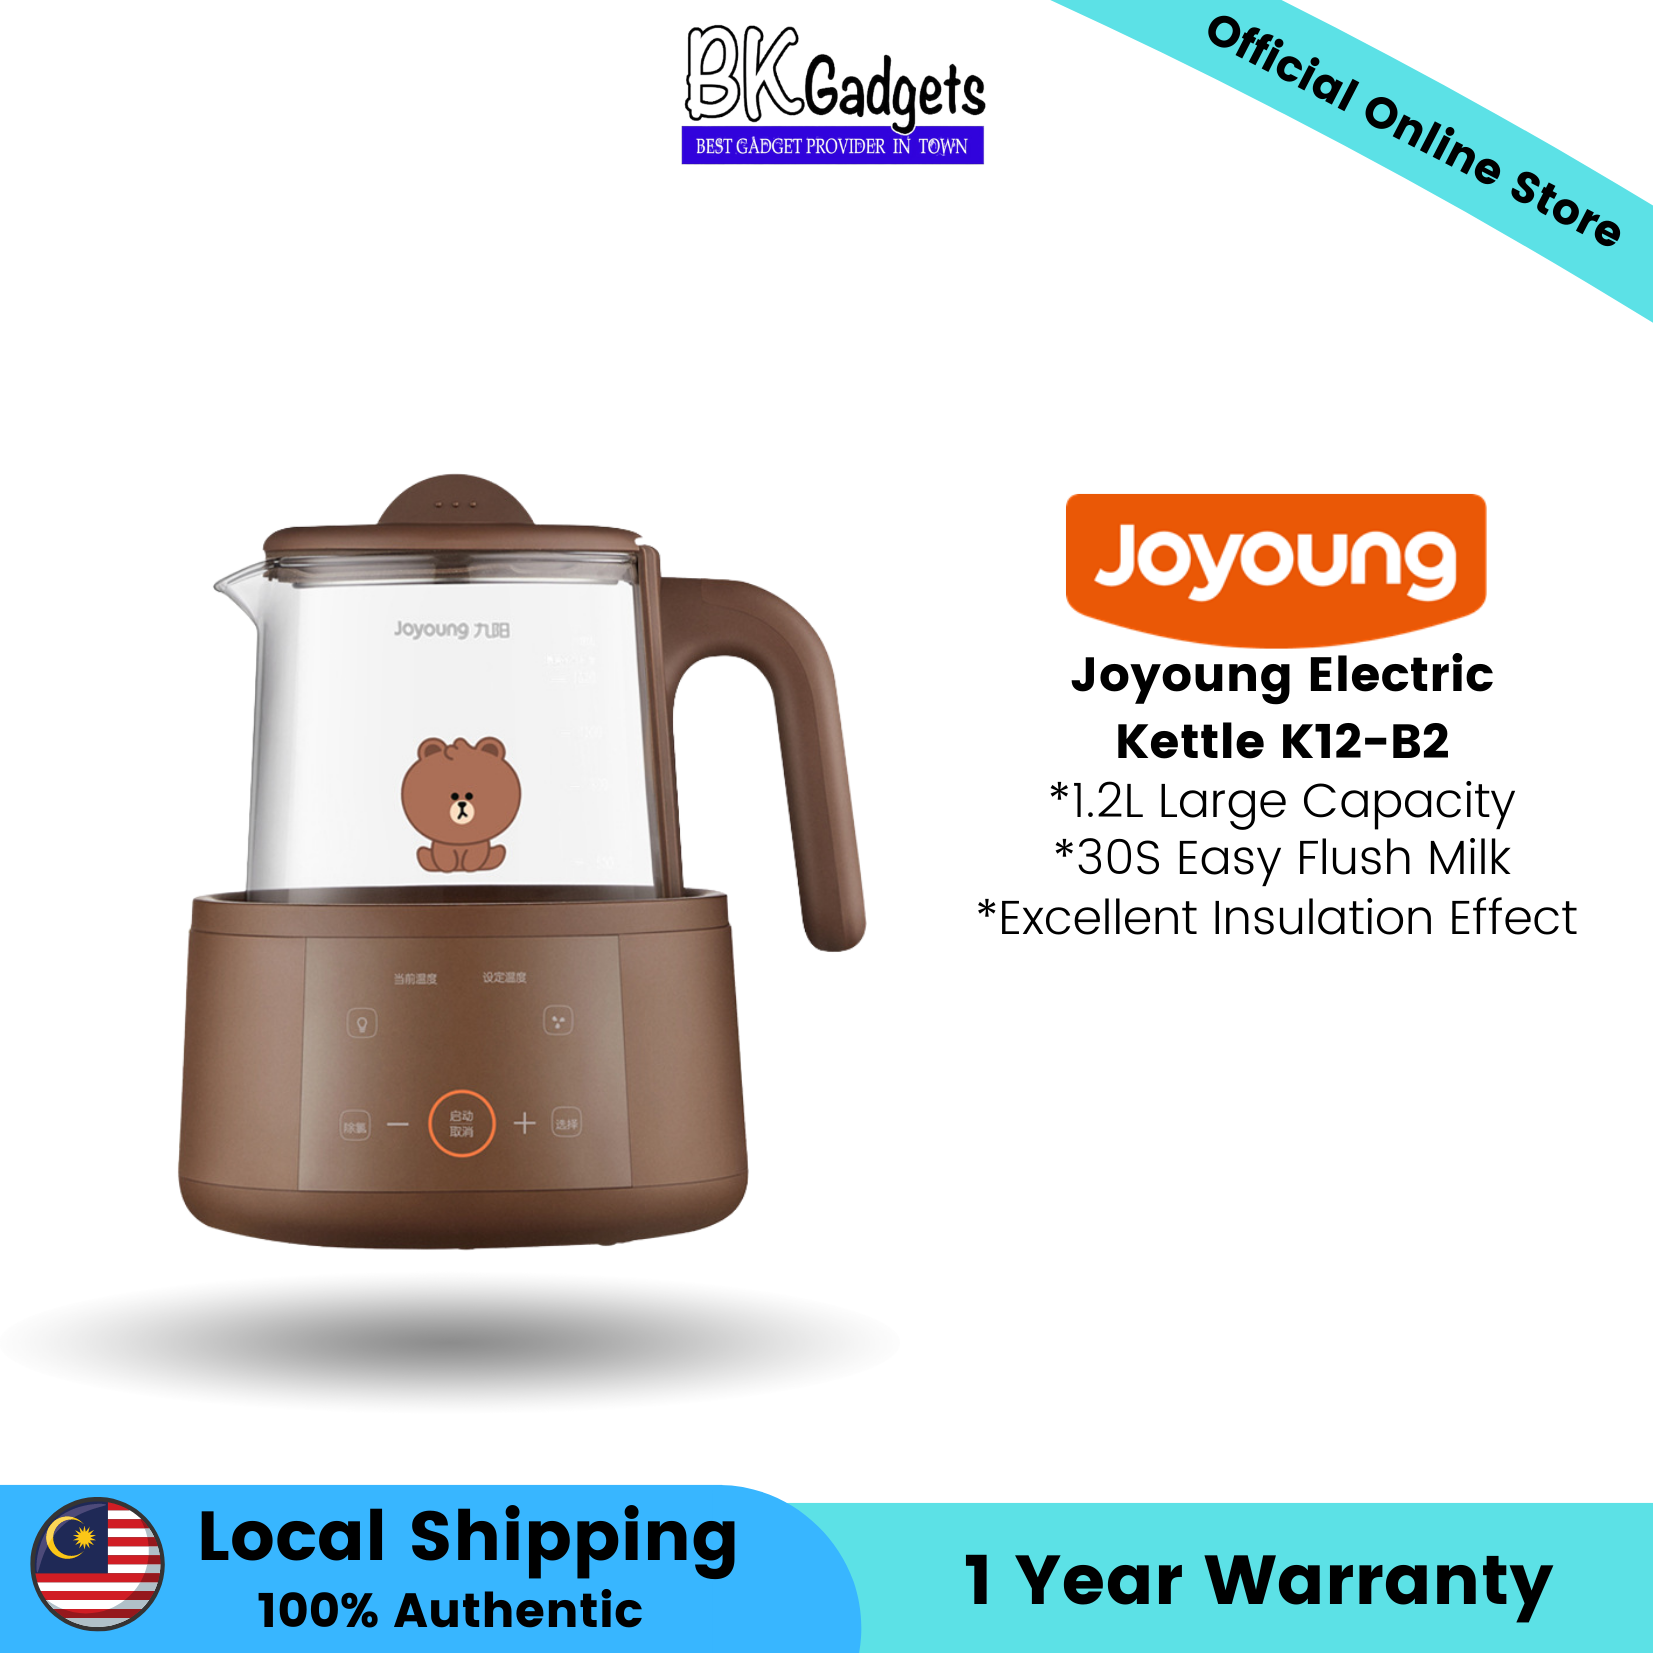 Joyoung Electric Kettle K12-B2 - 1.2L Large Capacity 30s Easy Flush Milk Excellent Insulation Effect